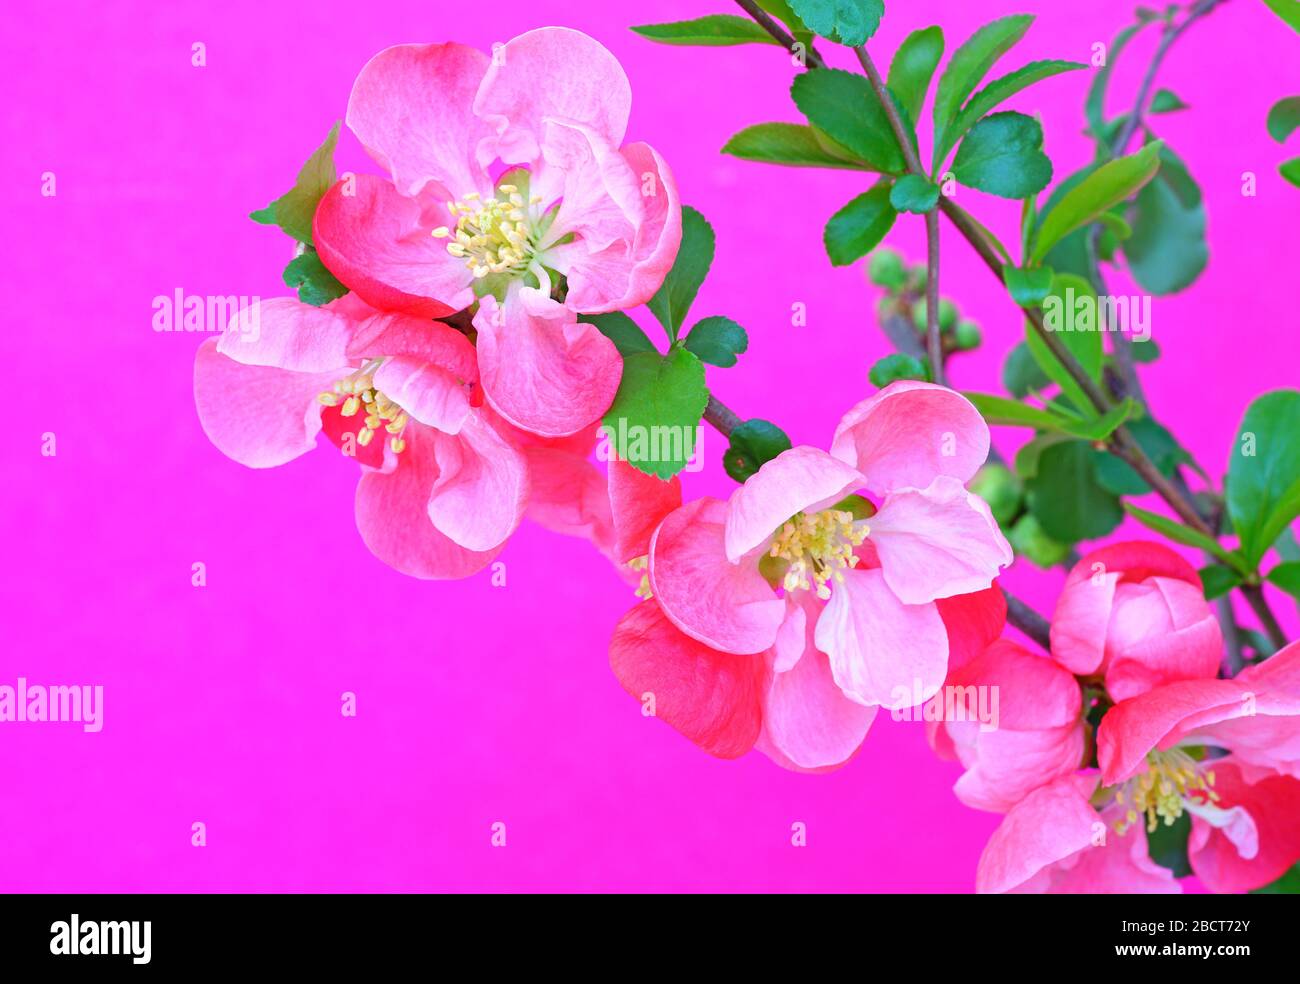 Red orange blooms of flowering quince chaenomeles shrub Stock Photo